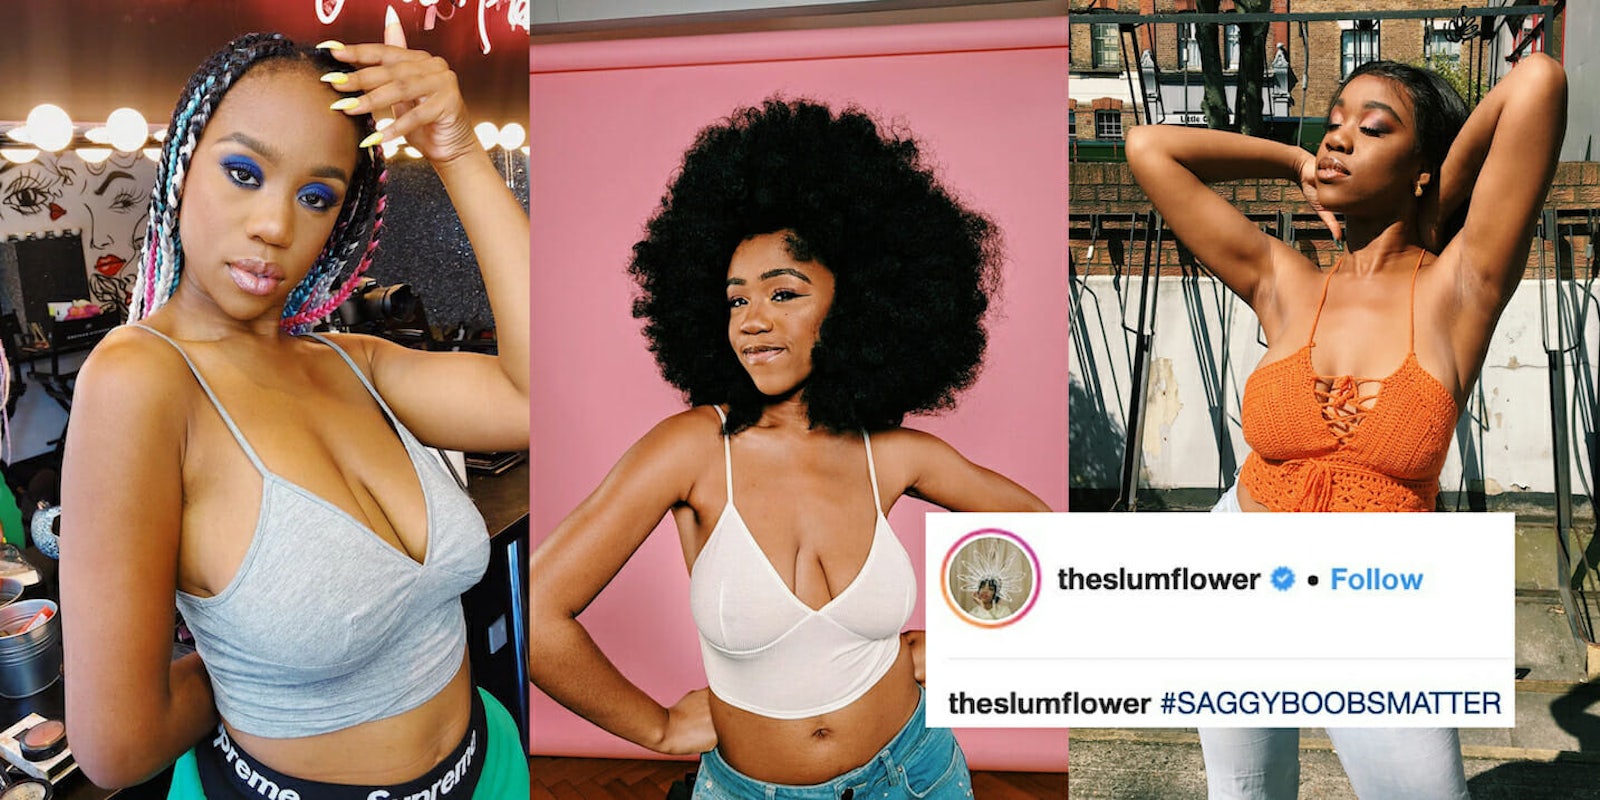 People are showing that #SaggyBoobsMatter after social media influencer Chidera Eggerue's movement.